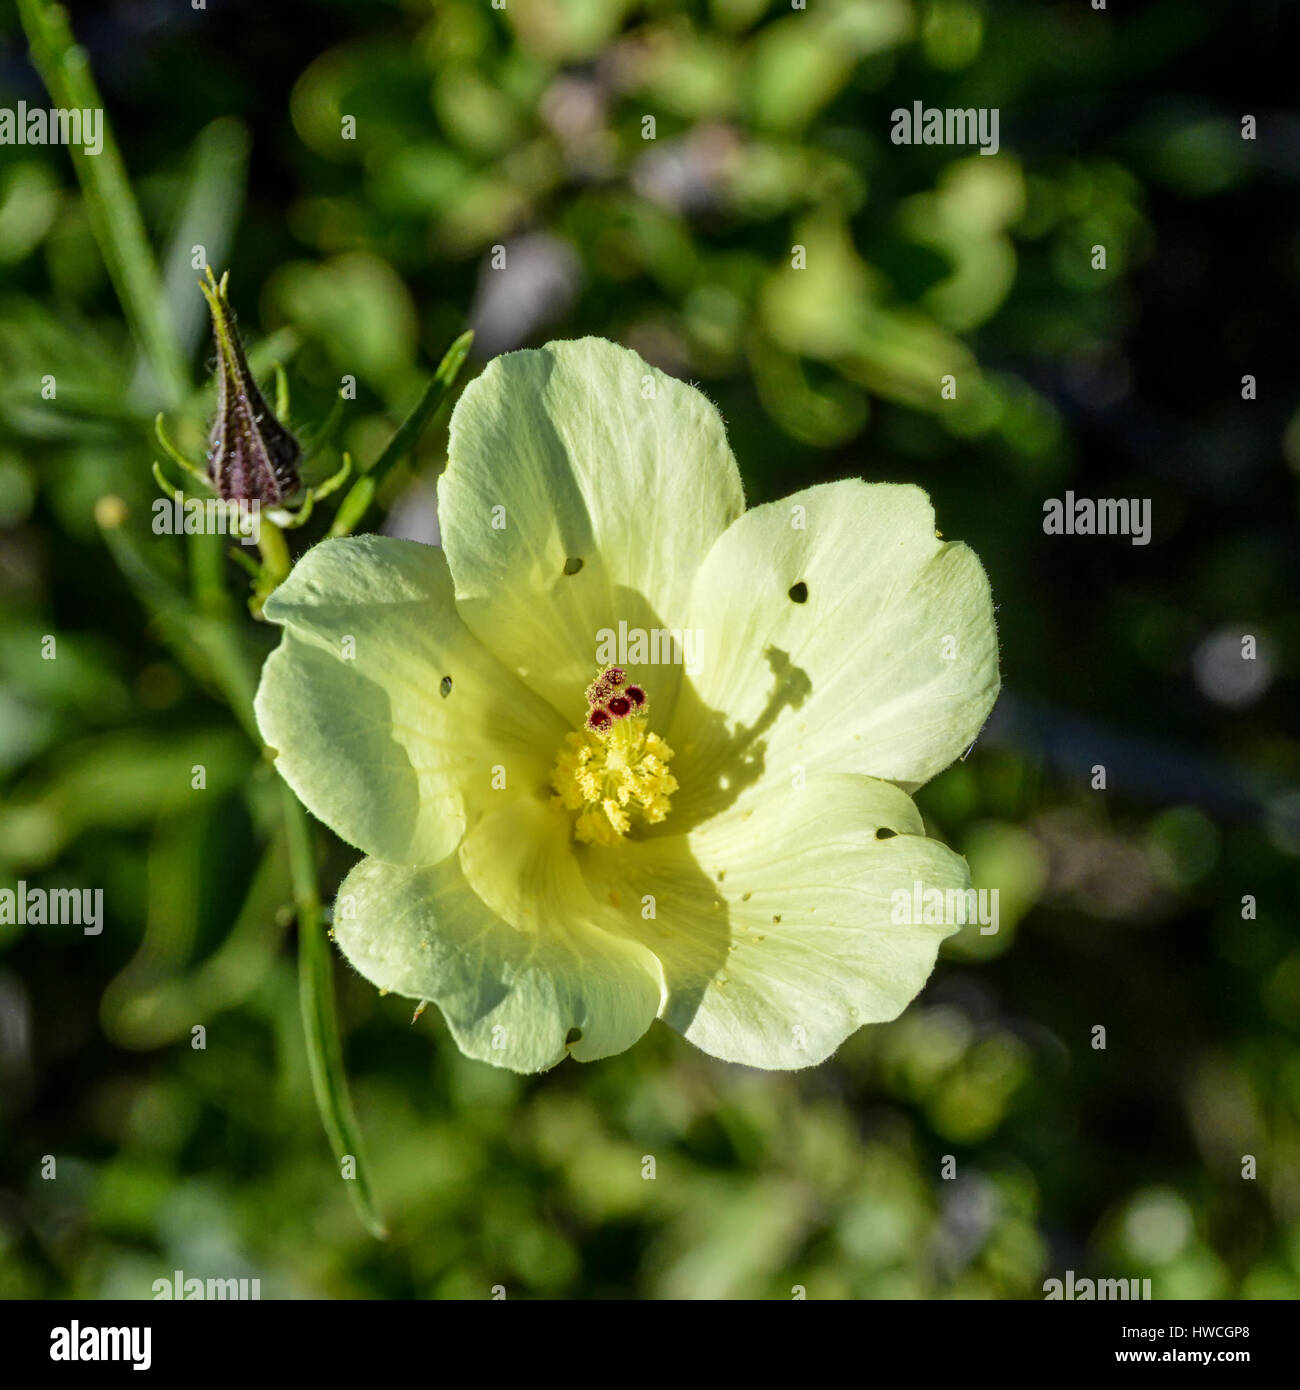 A Hibiscus aethiopicus flower in Southern African savanna Stock Photo